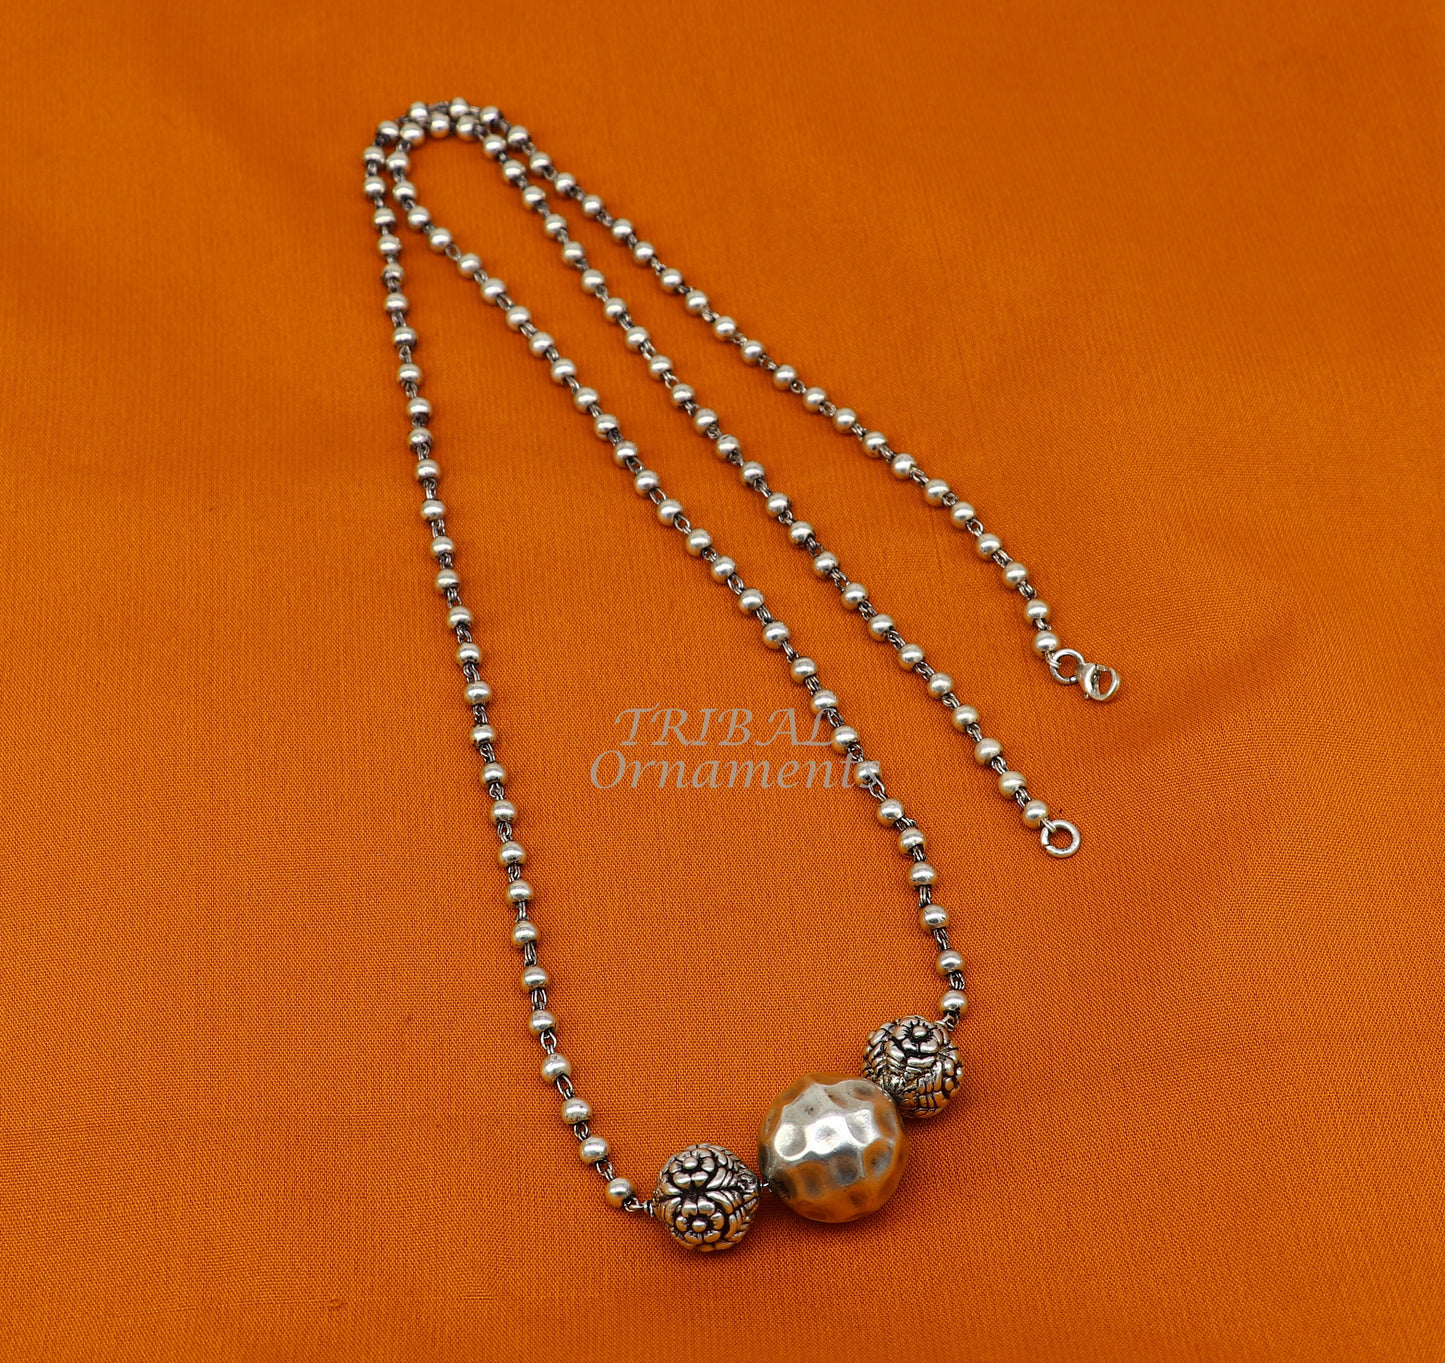 925 sterling silver handmade 4mm beads long necklace, unique ball design pendant traditional cultural functional necklace jewelry  set542 - TRIBAL ORNAMENTS